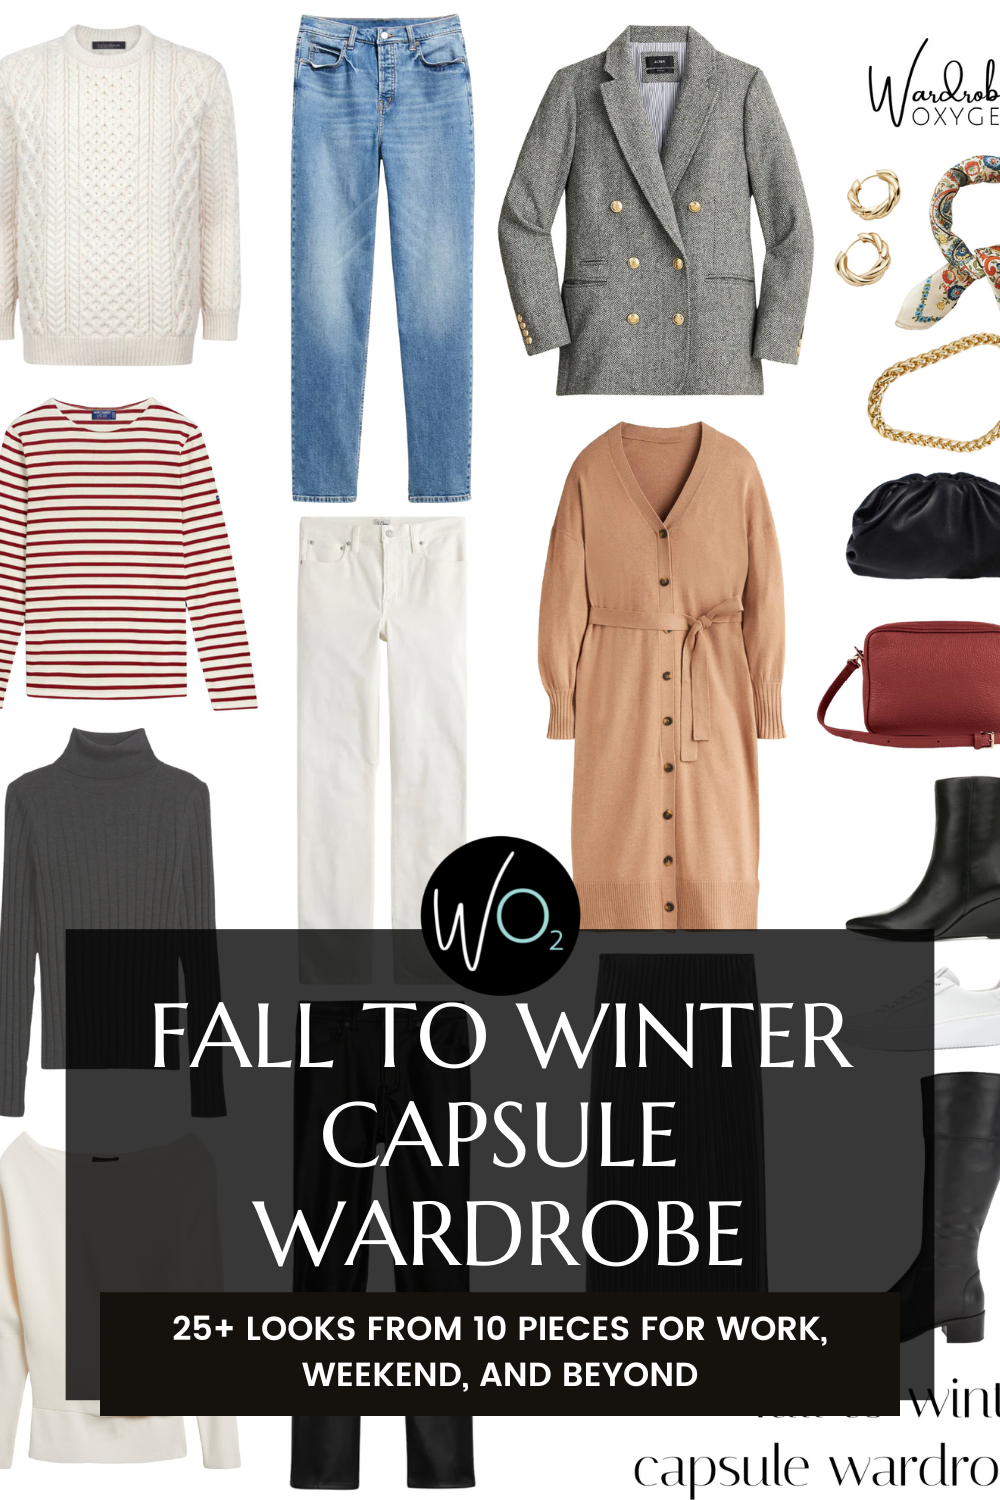 Fall to Winter Capsule Wardrobe: 25+ Looks for Work, Weekend, and Beyond